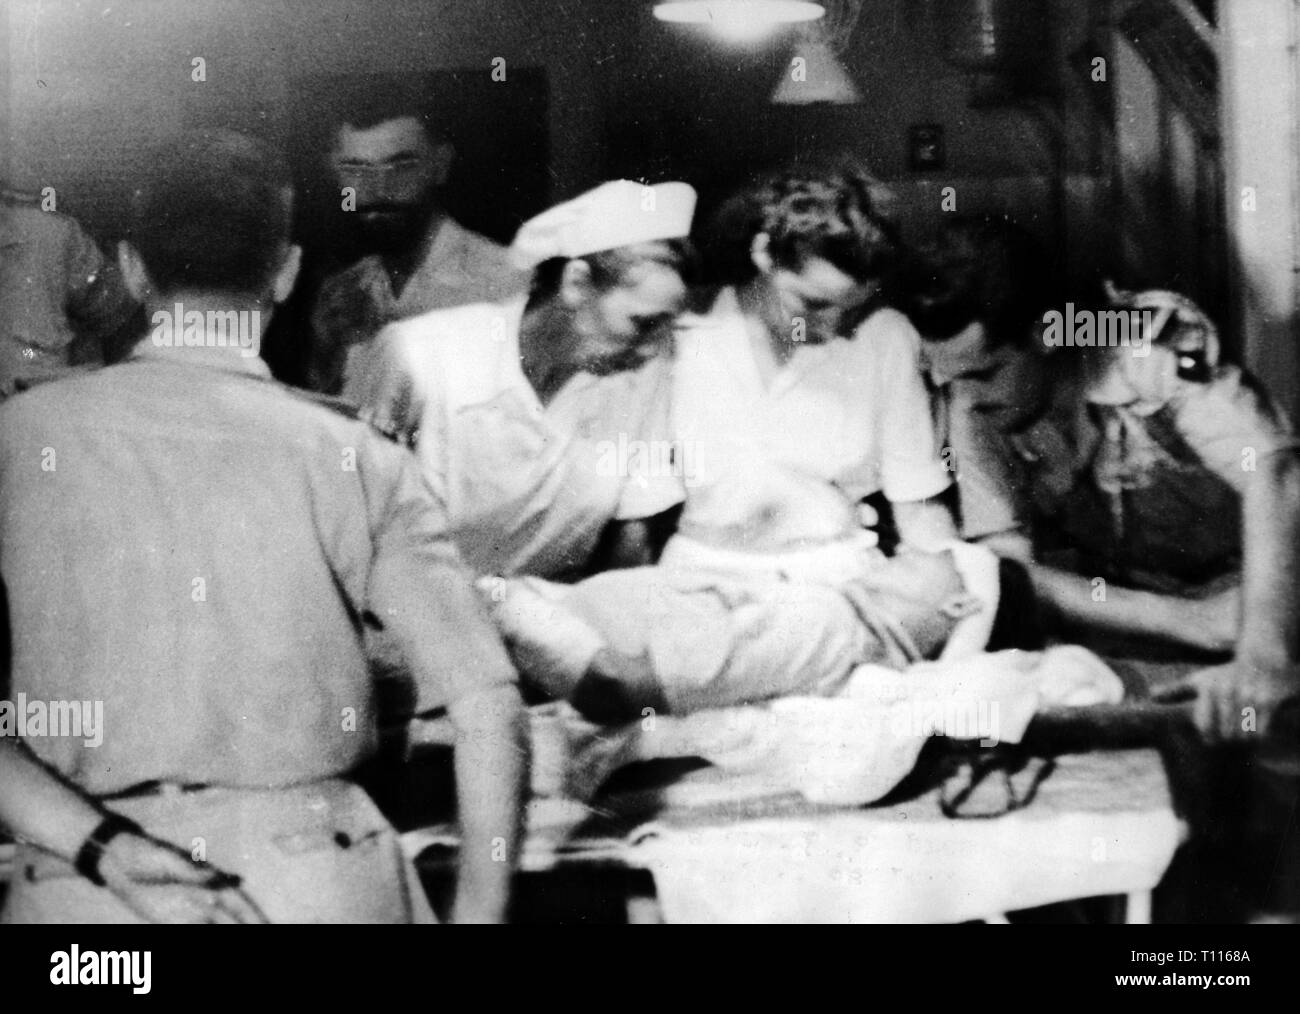 Indochina War 1946 - 1954, battle at di bi Phu, 13.3. - 7.5.1954, arrival a wounded Foreign Legionnaire in the Lanessean hospital, Hanoi, 18.3.1954, Foreign Legionnaire, Foreign Legion, soldiers, soldier, physician, physicians, military surgeon, military surgeons, nurse, nurses, female, women, sick bay, sick bays, medical corps organisation, health care, healthcare, Viet Nam, North Vietnam, wars, French Indochina, Indochina, French colony, colonial war, military, army, armies, paratroop, paratroops, paratrooper, Para, paratroopers, Paras, airborn, Additional-Rights-Clearance-Info-Not-Available Stock Photo